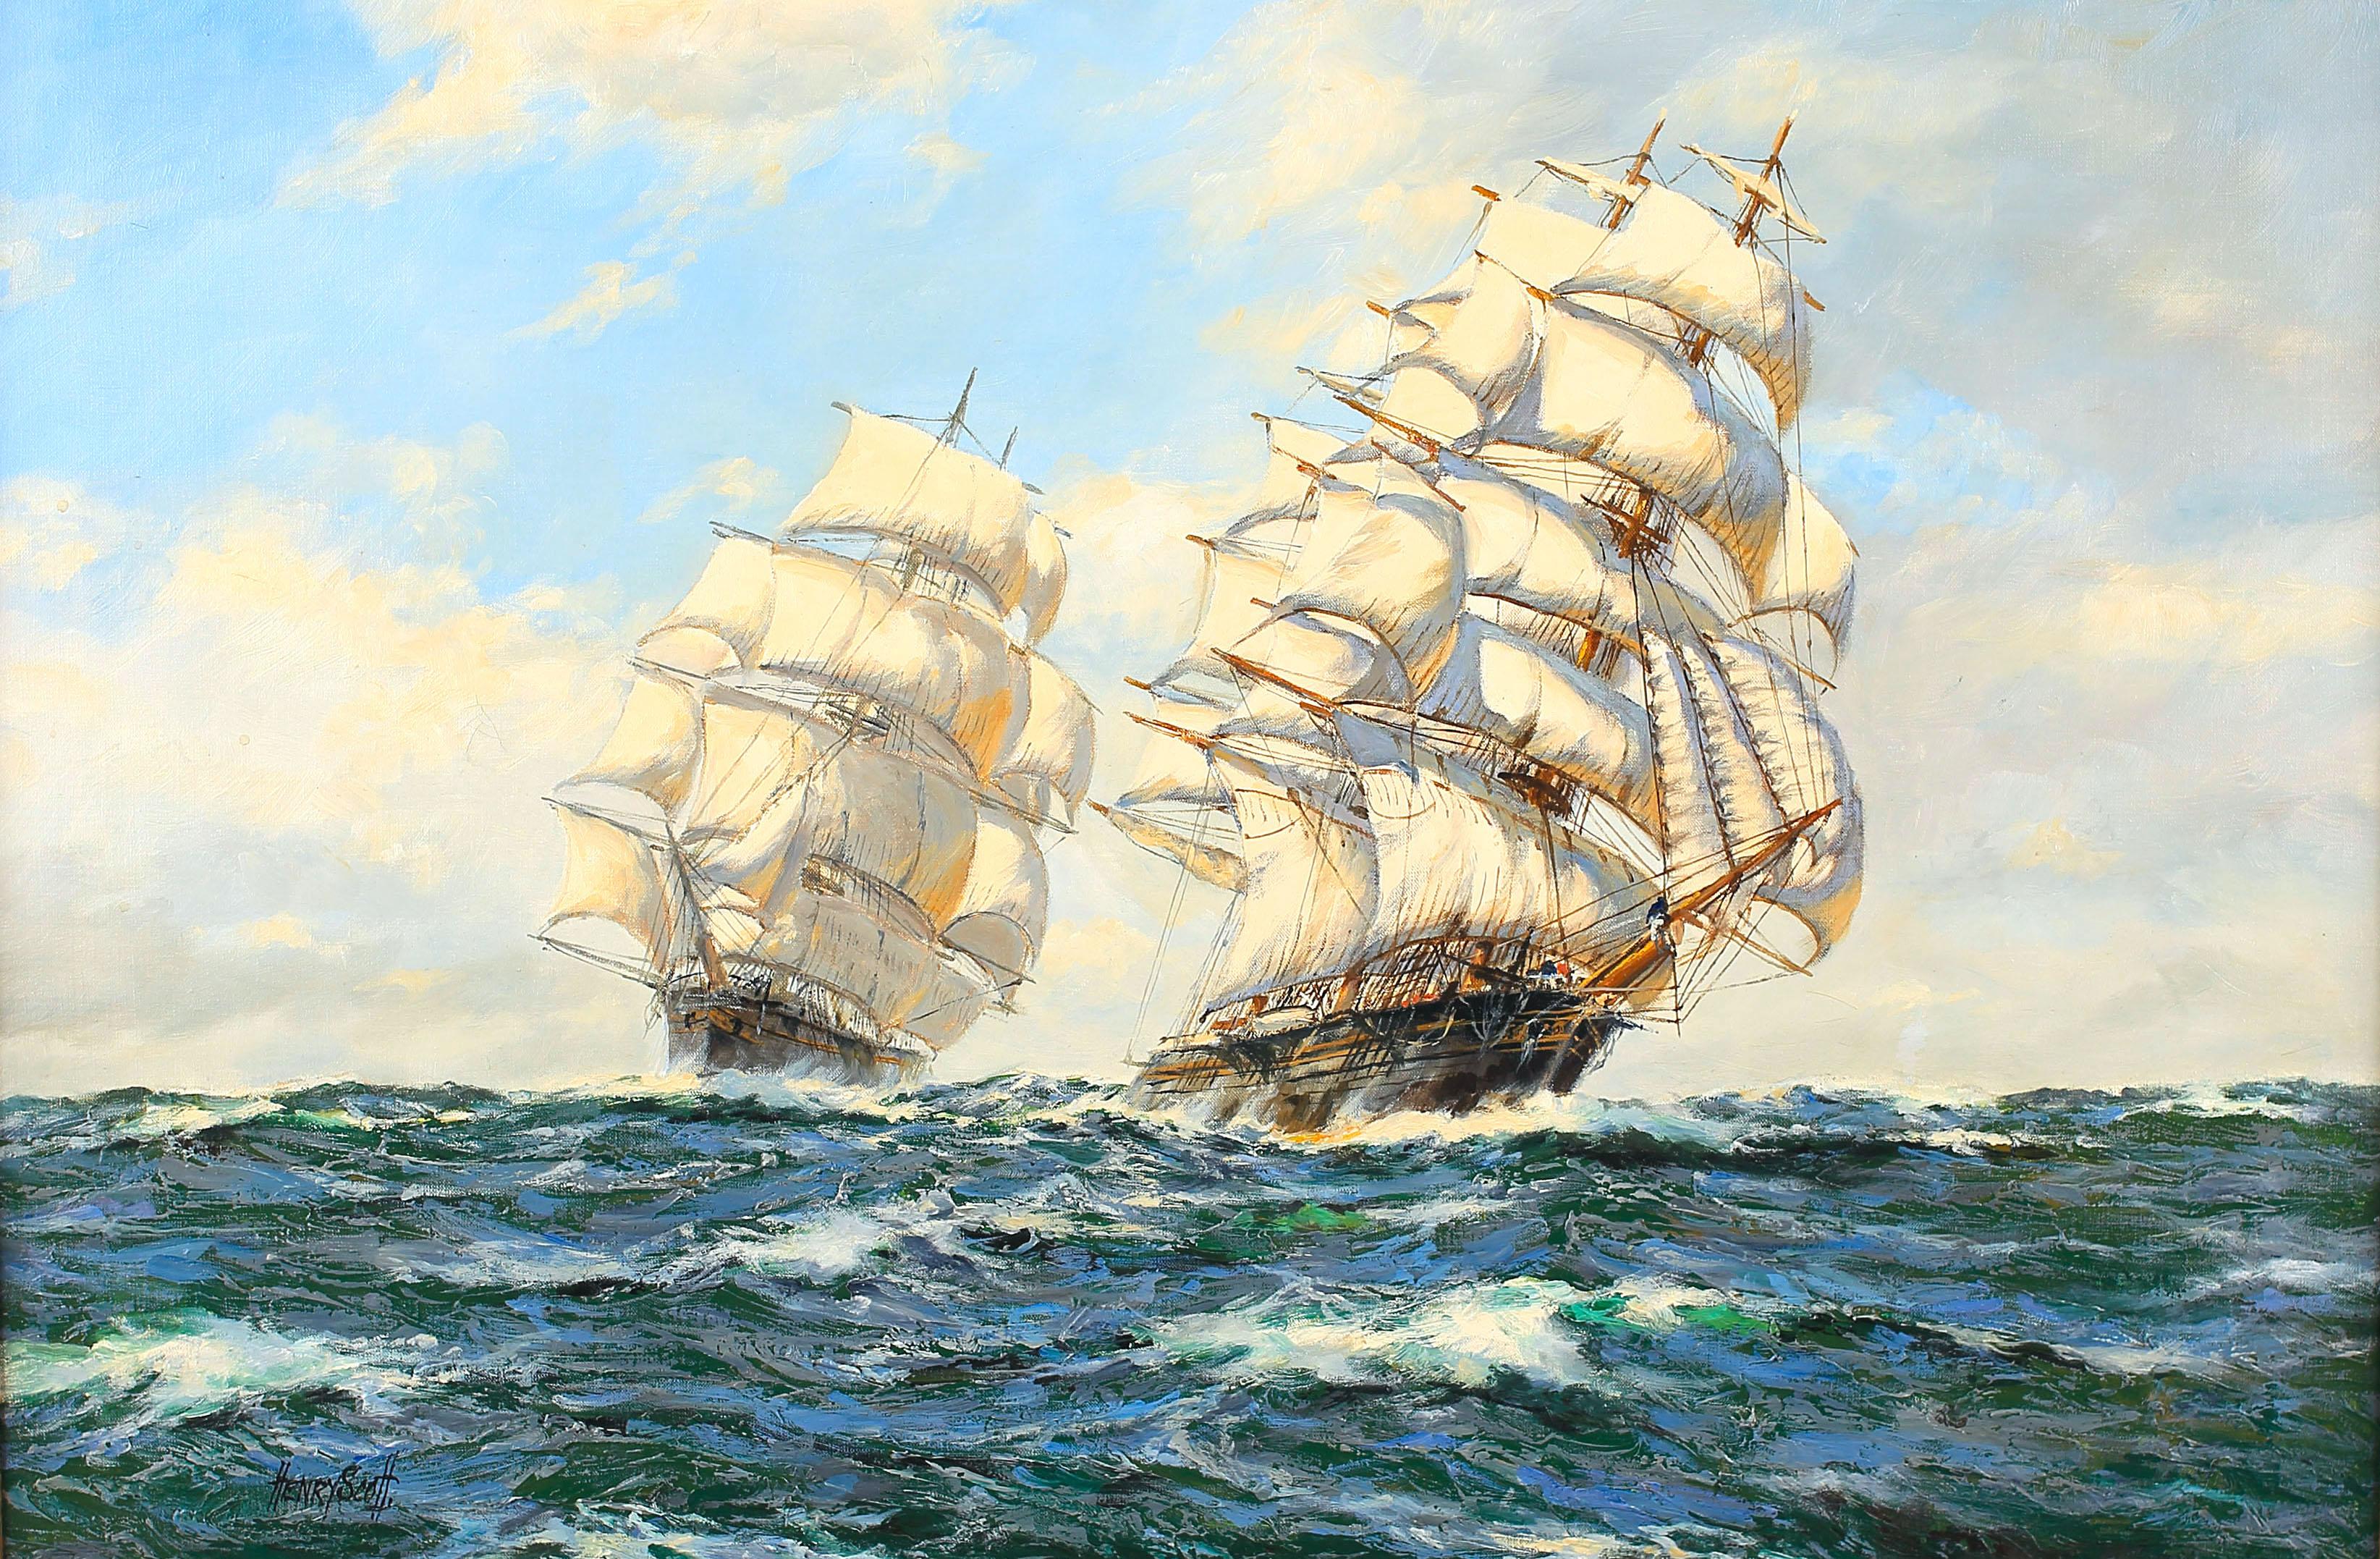 Tea Clipper 'Taeping' closing in on the Clipper 'Ariel', 1866 - Painting by Henry Scott